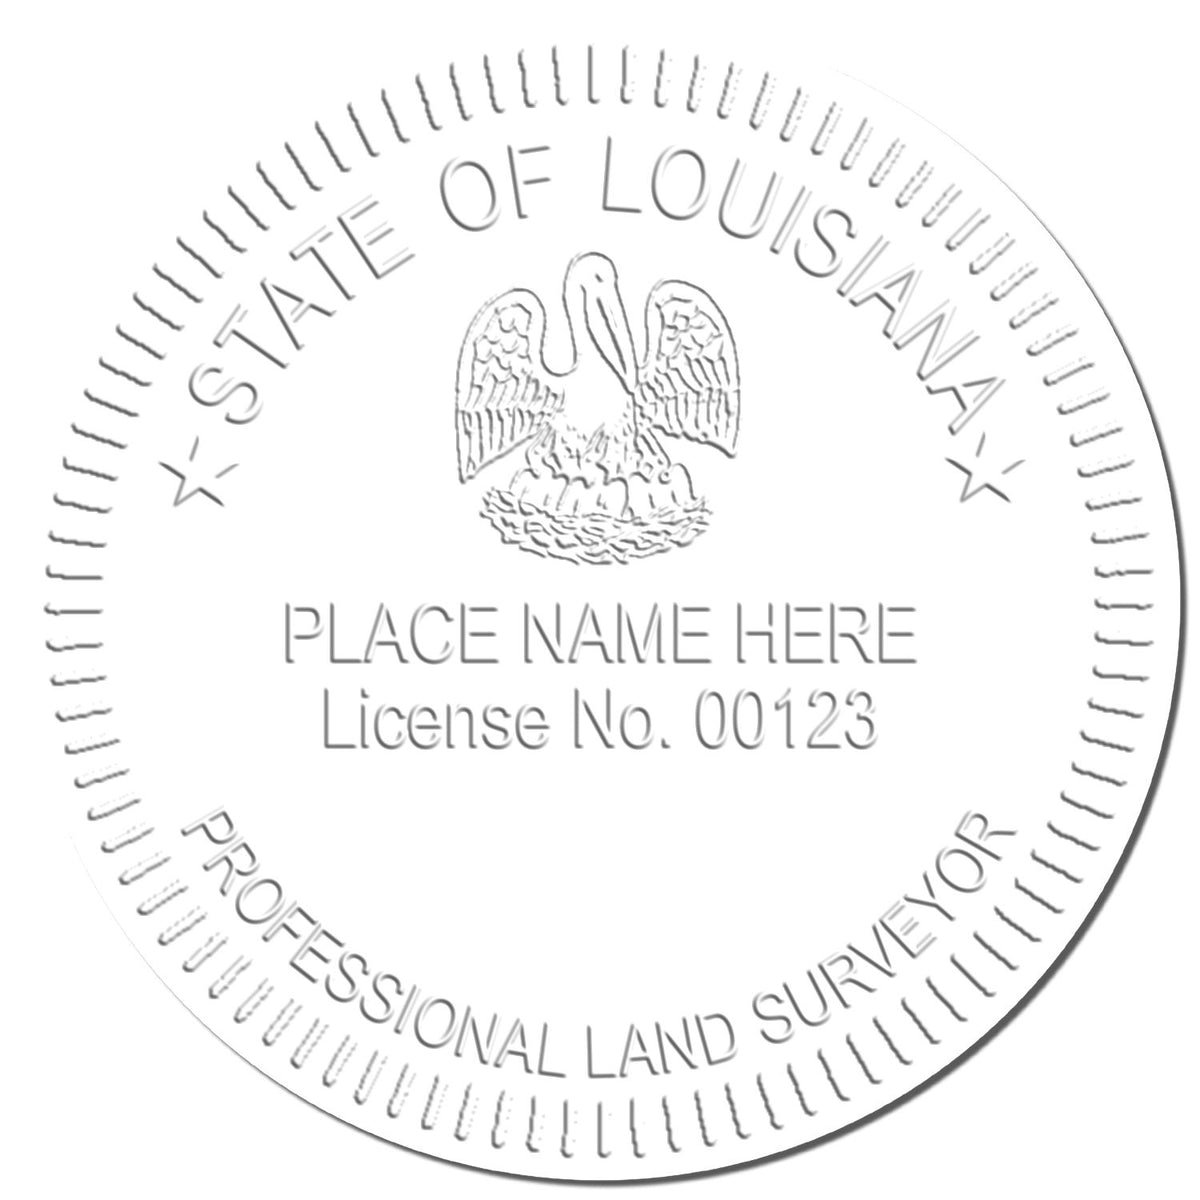 This paper is stamped with a sample imprint of the State of Louisiana Soft Land Surveyor Embossing Seal, signifying its quality and reliability.